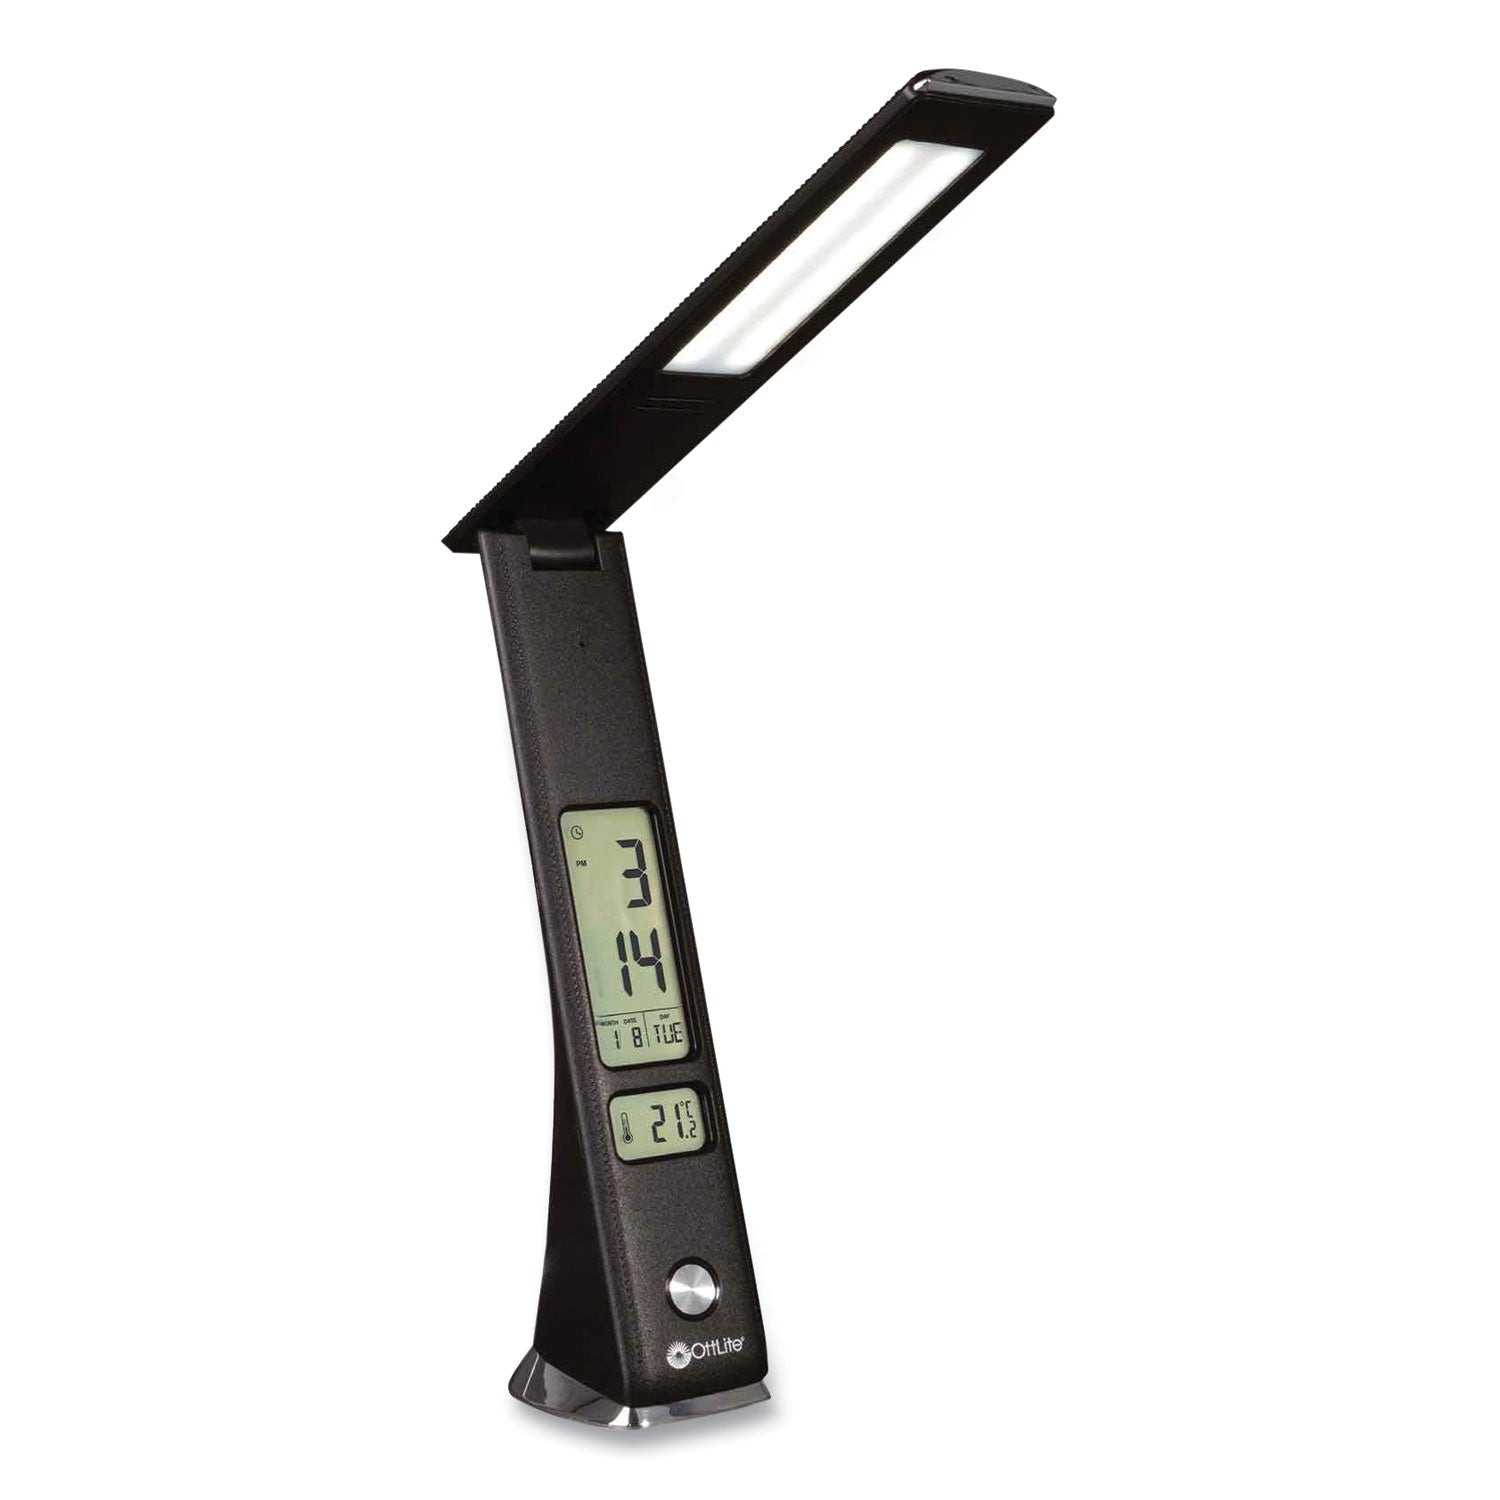 wellness-series-rise-led-desk-lamp-with-digital-display-12-to-19-high-black-ships-in-4-6-business-days_ottcse13g59 - 1